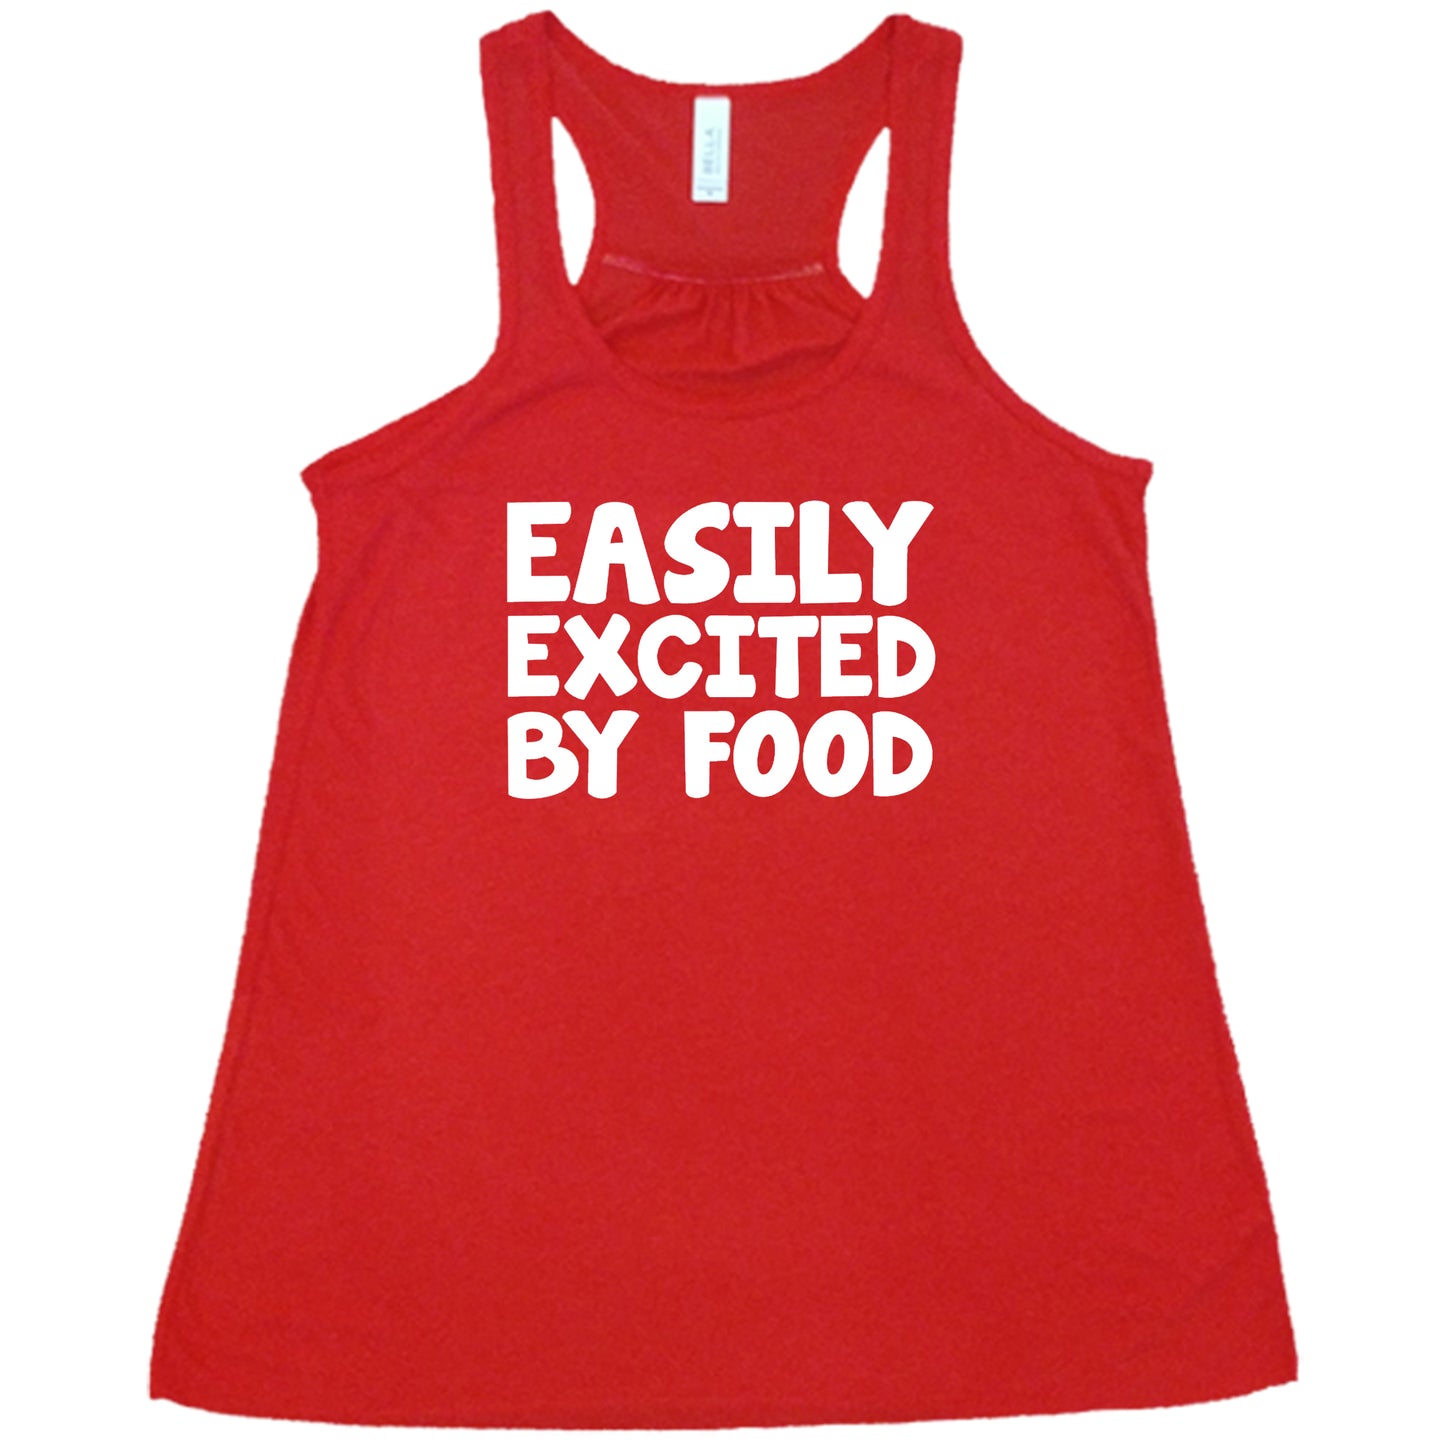 Easily Excited By Food Shirt